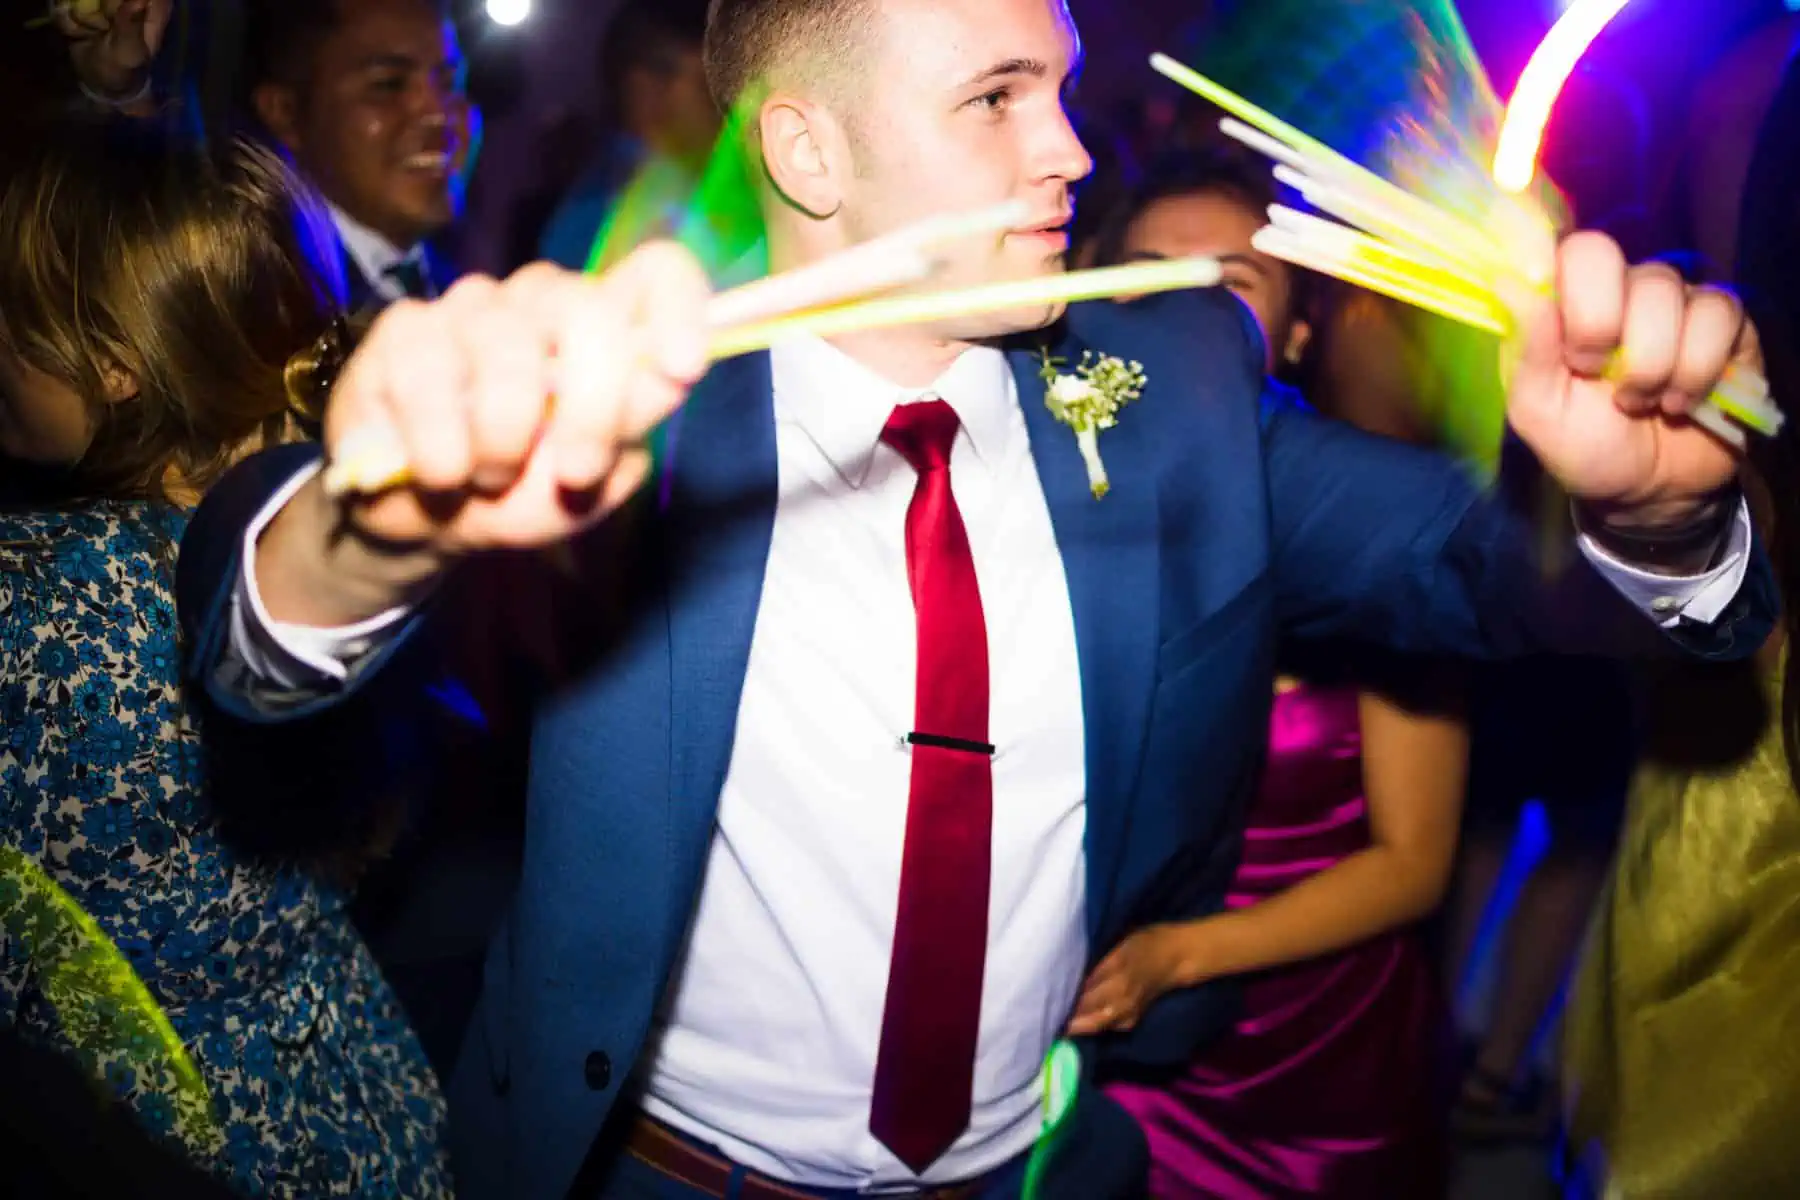 A man in a suit is dancing with a glow stick.